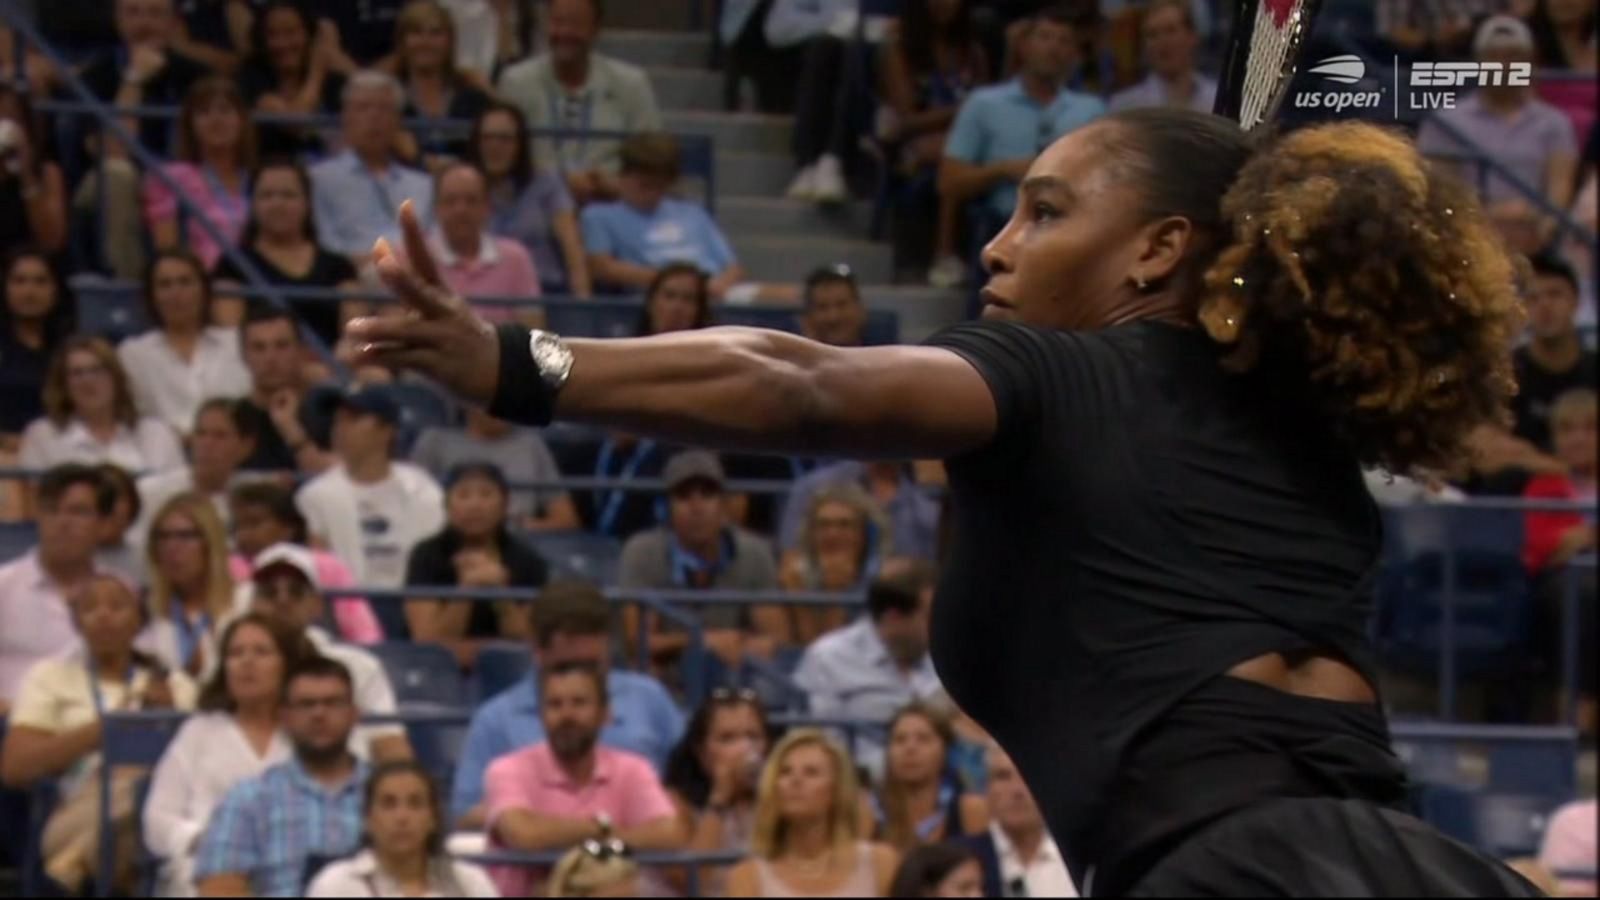 Serena Williams takes court for 3rd round match at US Open